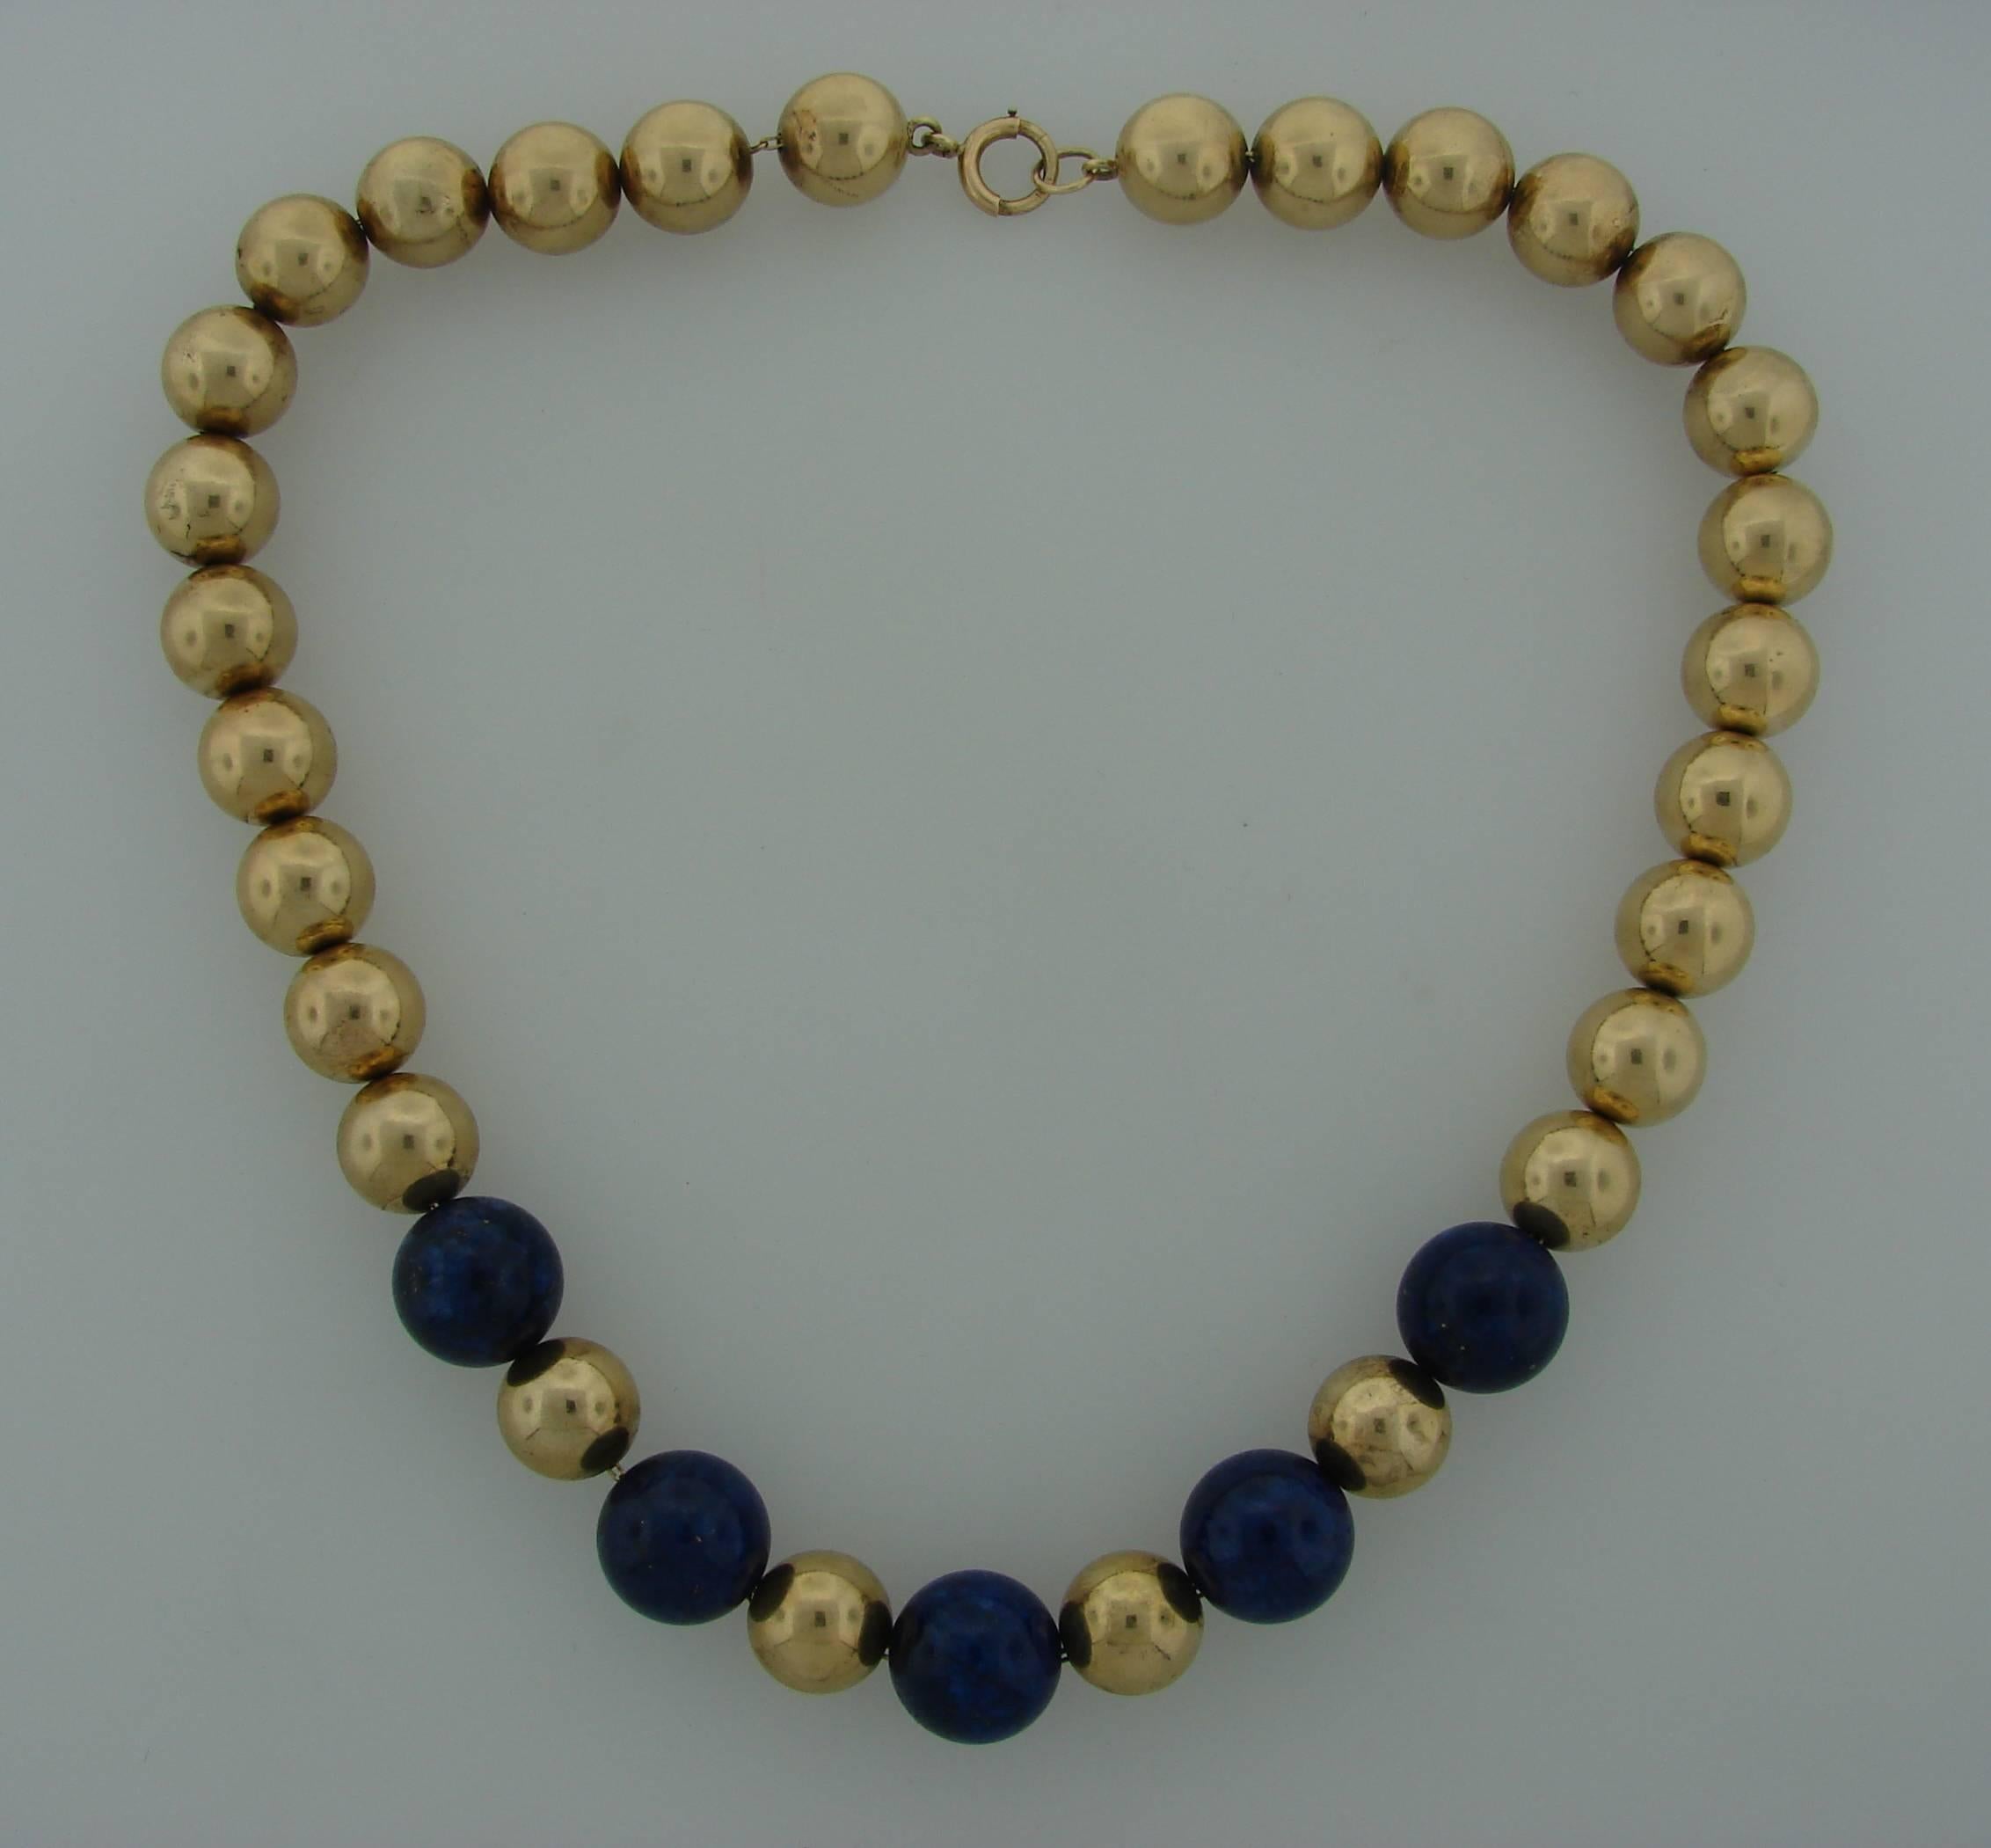 Lovely bead necklace created by Tiffany & Co. in the 1960's. Features five lapis lazuli beads alternating with yellow gold beads. 
The necklace is 18